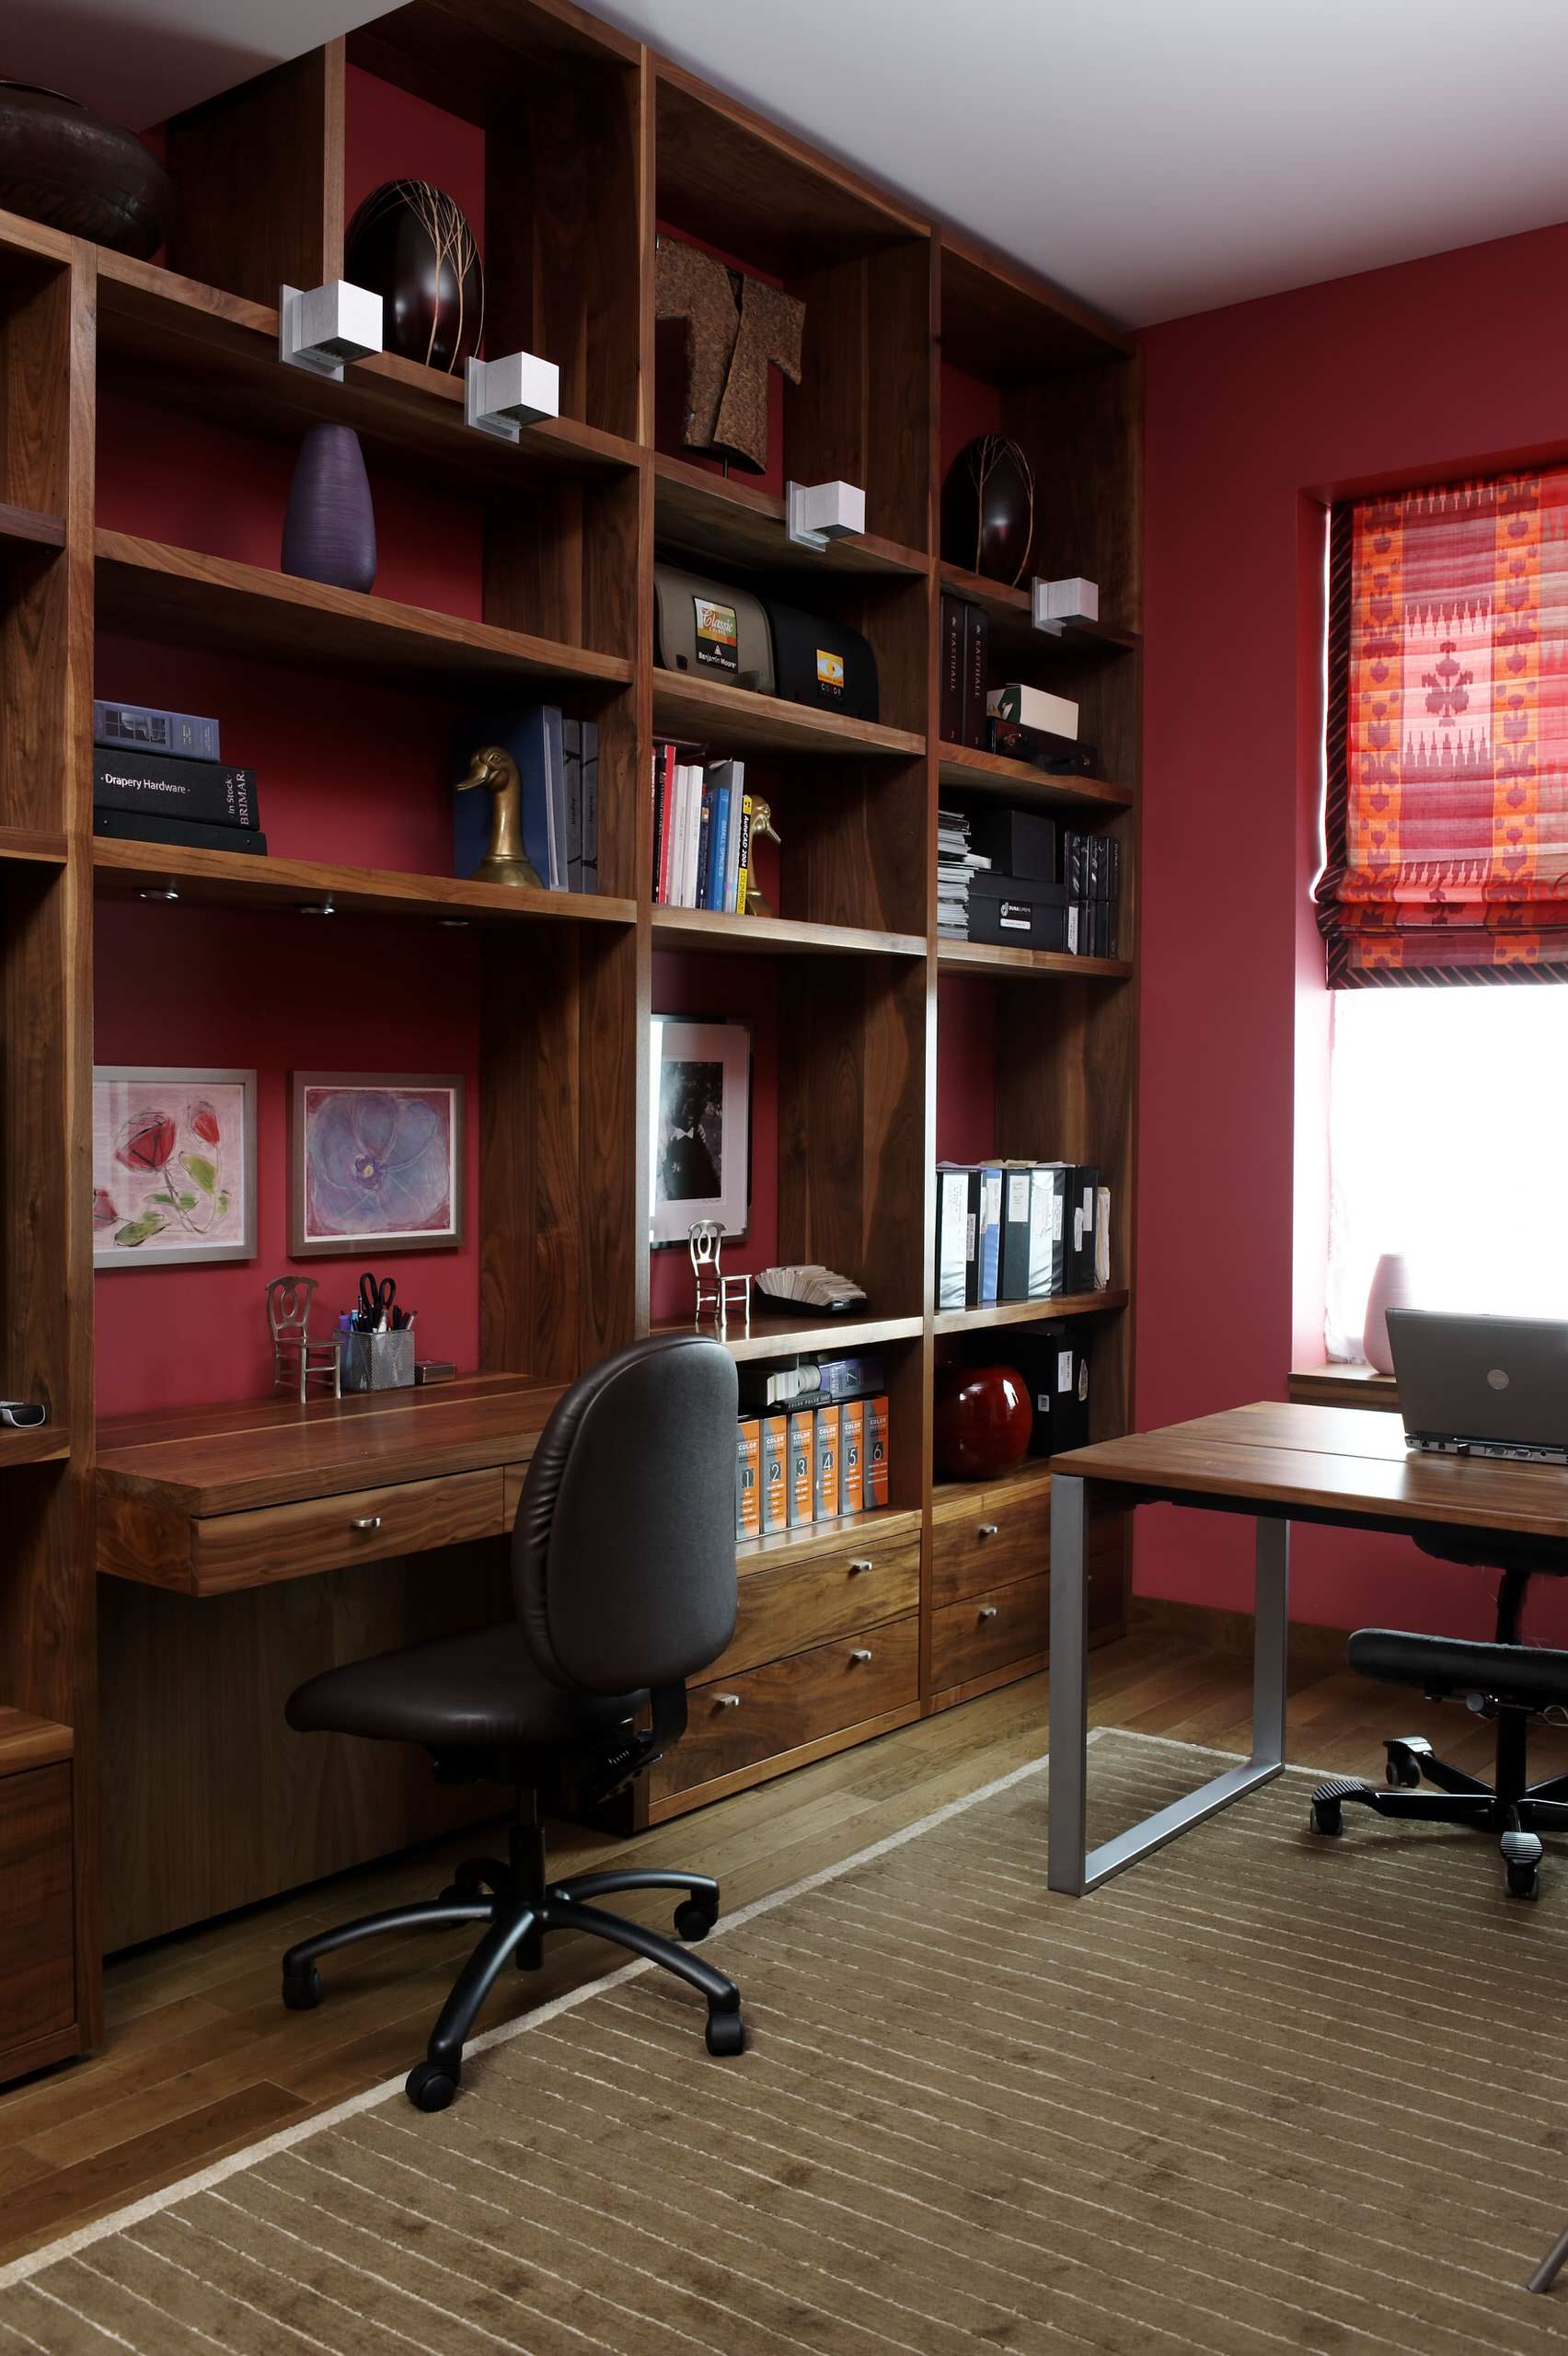 Home Office Desk and Décor Ideas, Rustic Red Door